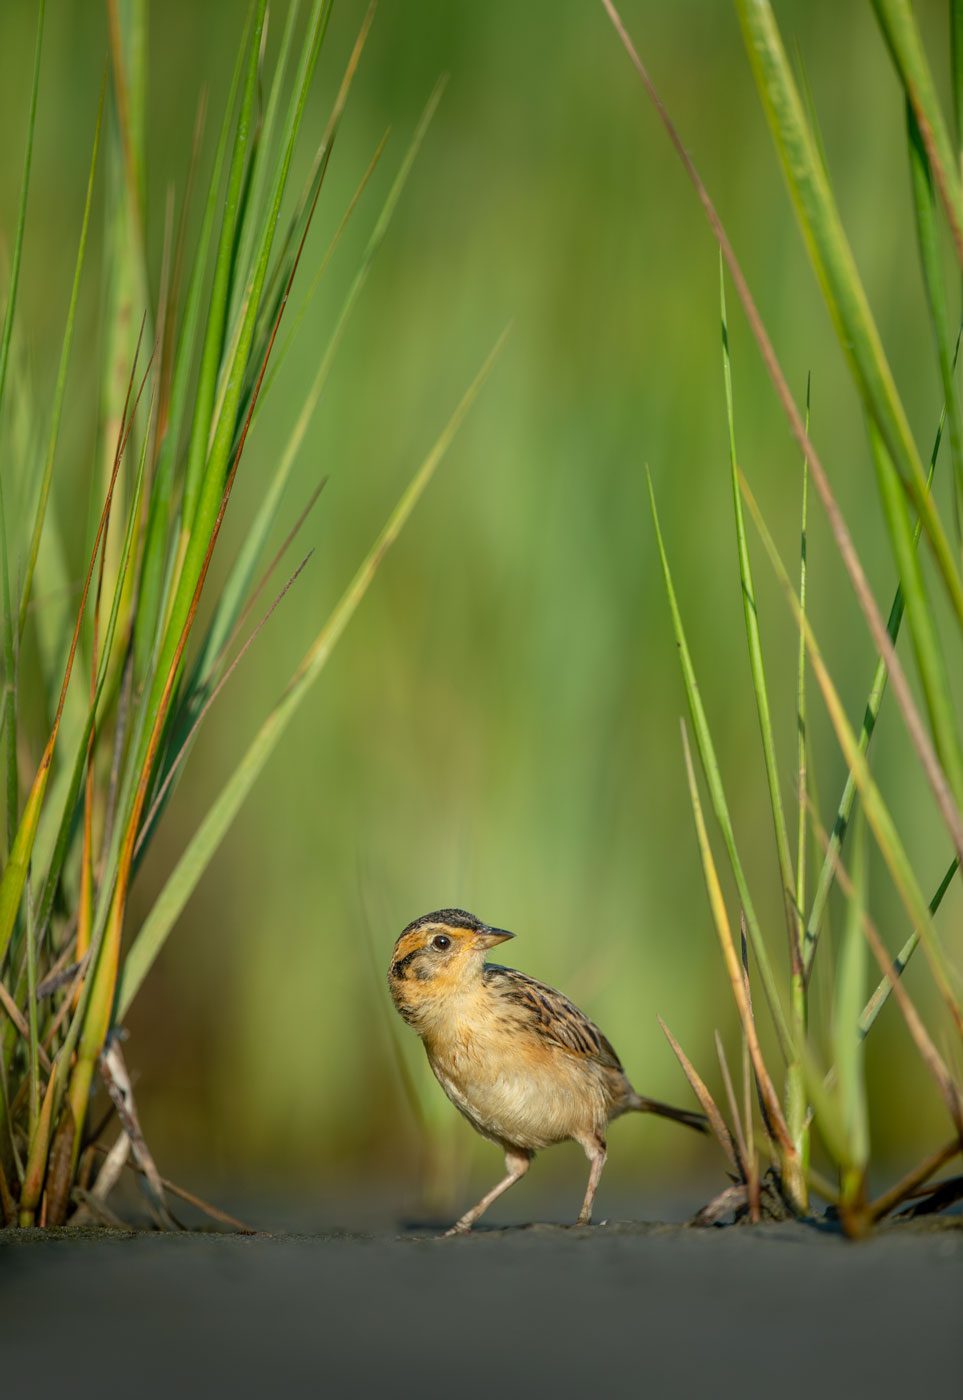 Saltmarsh Sparrow in the grasses. Photo by Ray Hennessy.